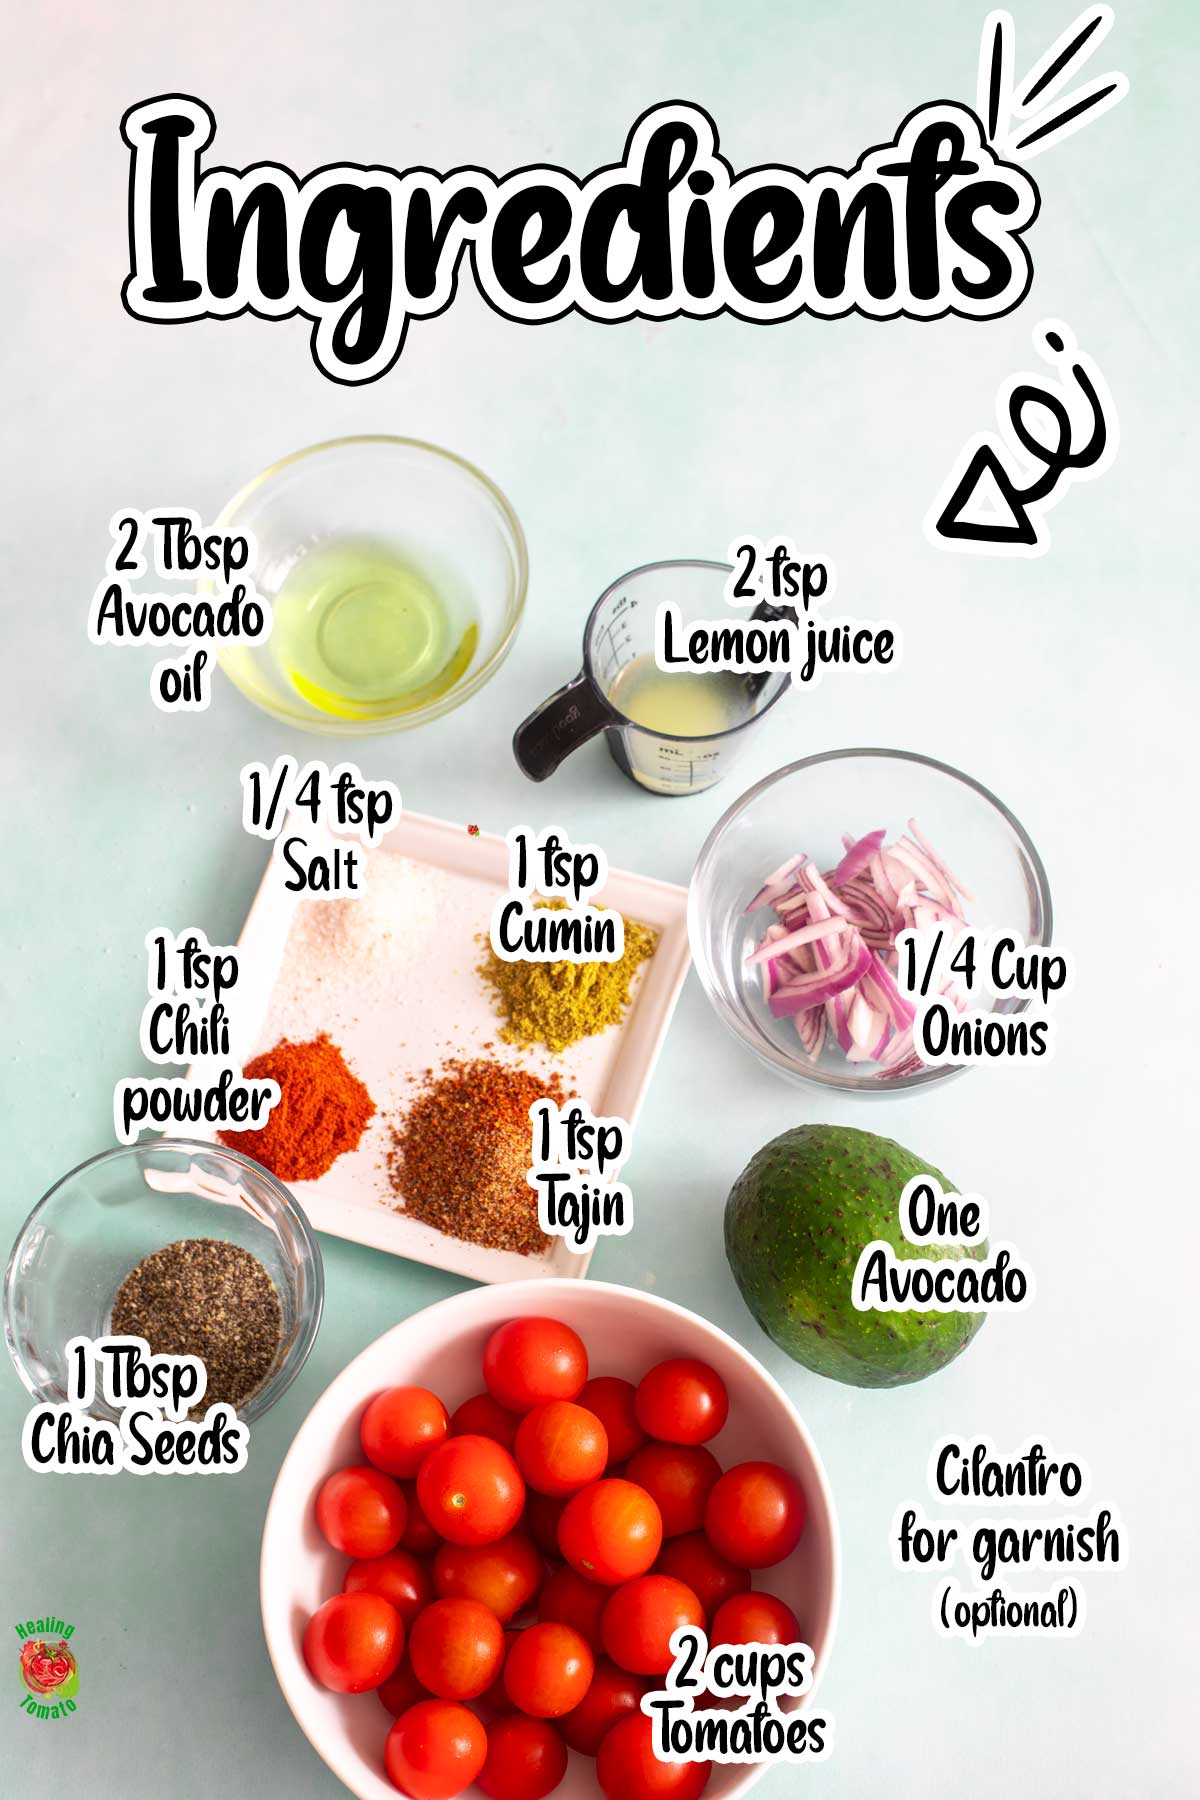 Top view of the ingredients needed to make this salad with their measurements